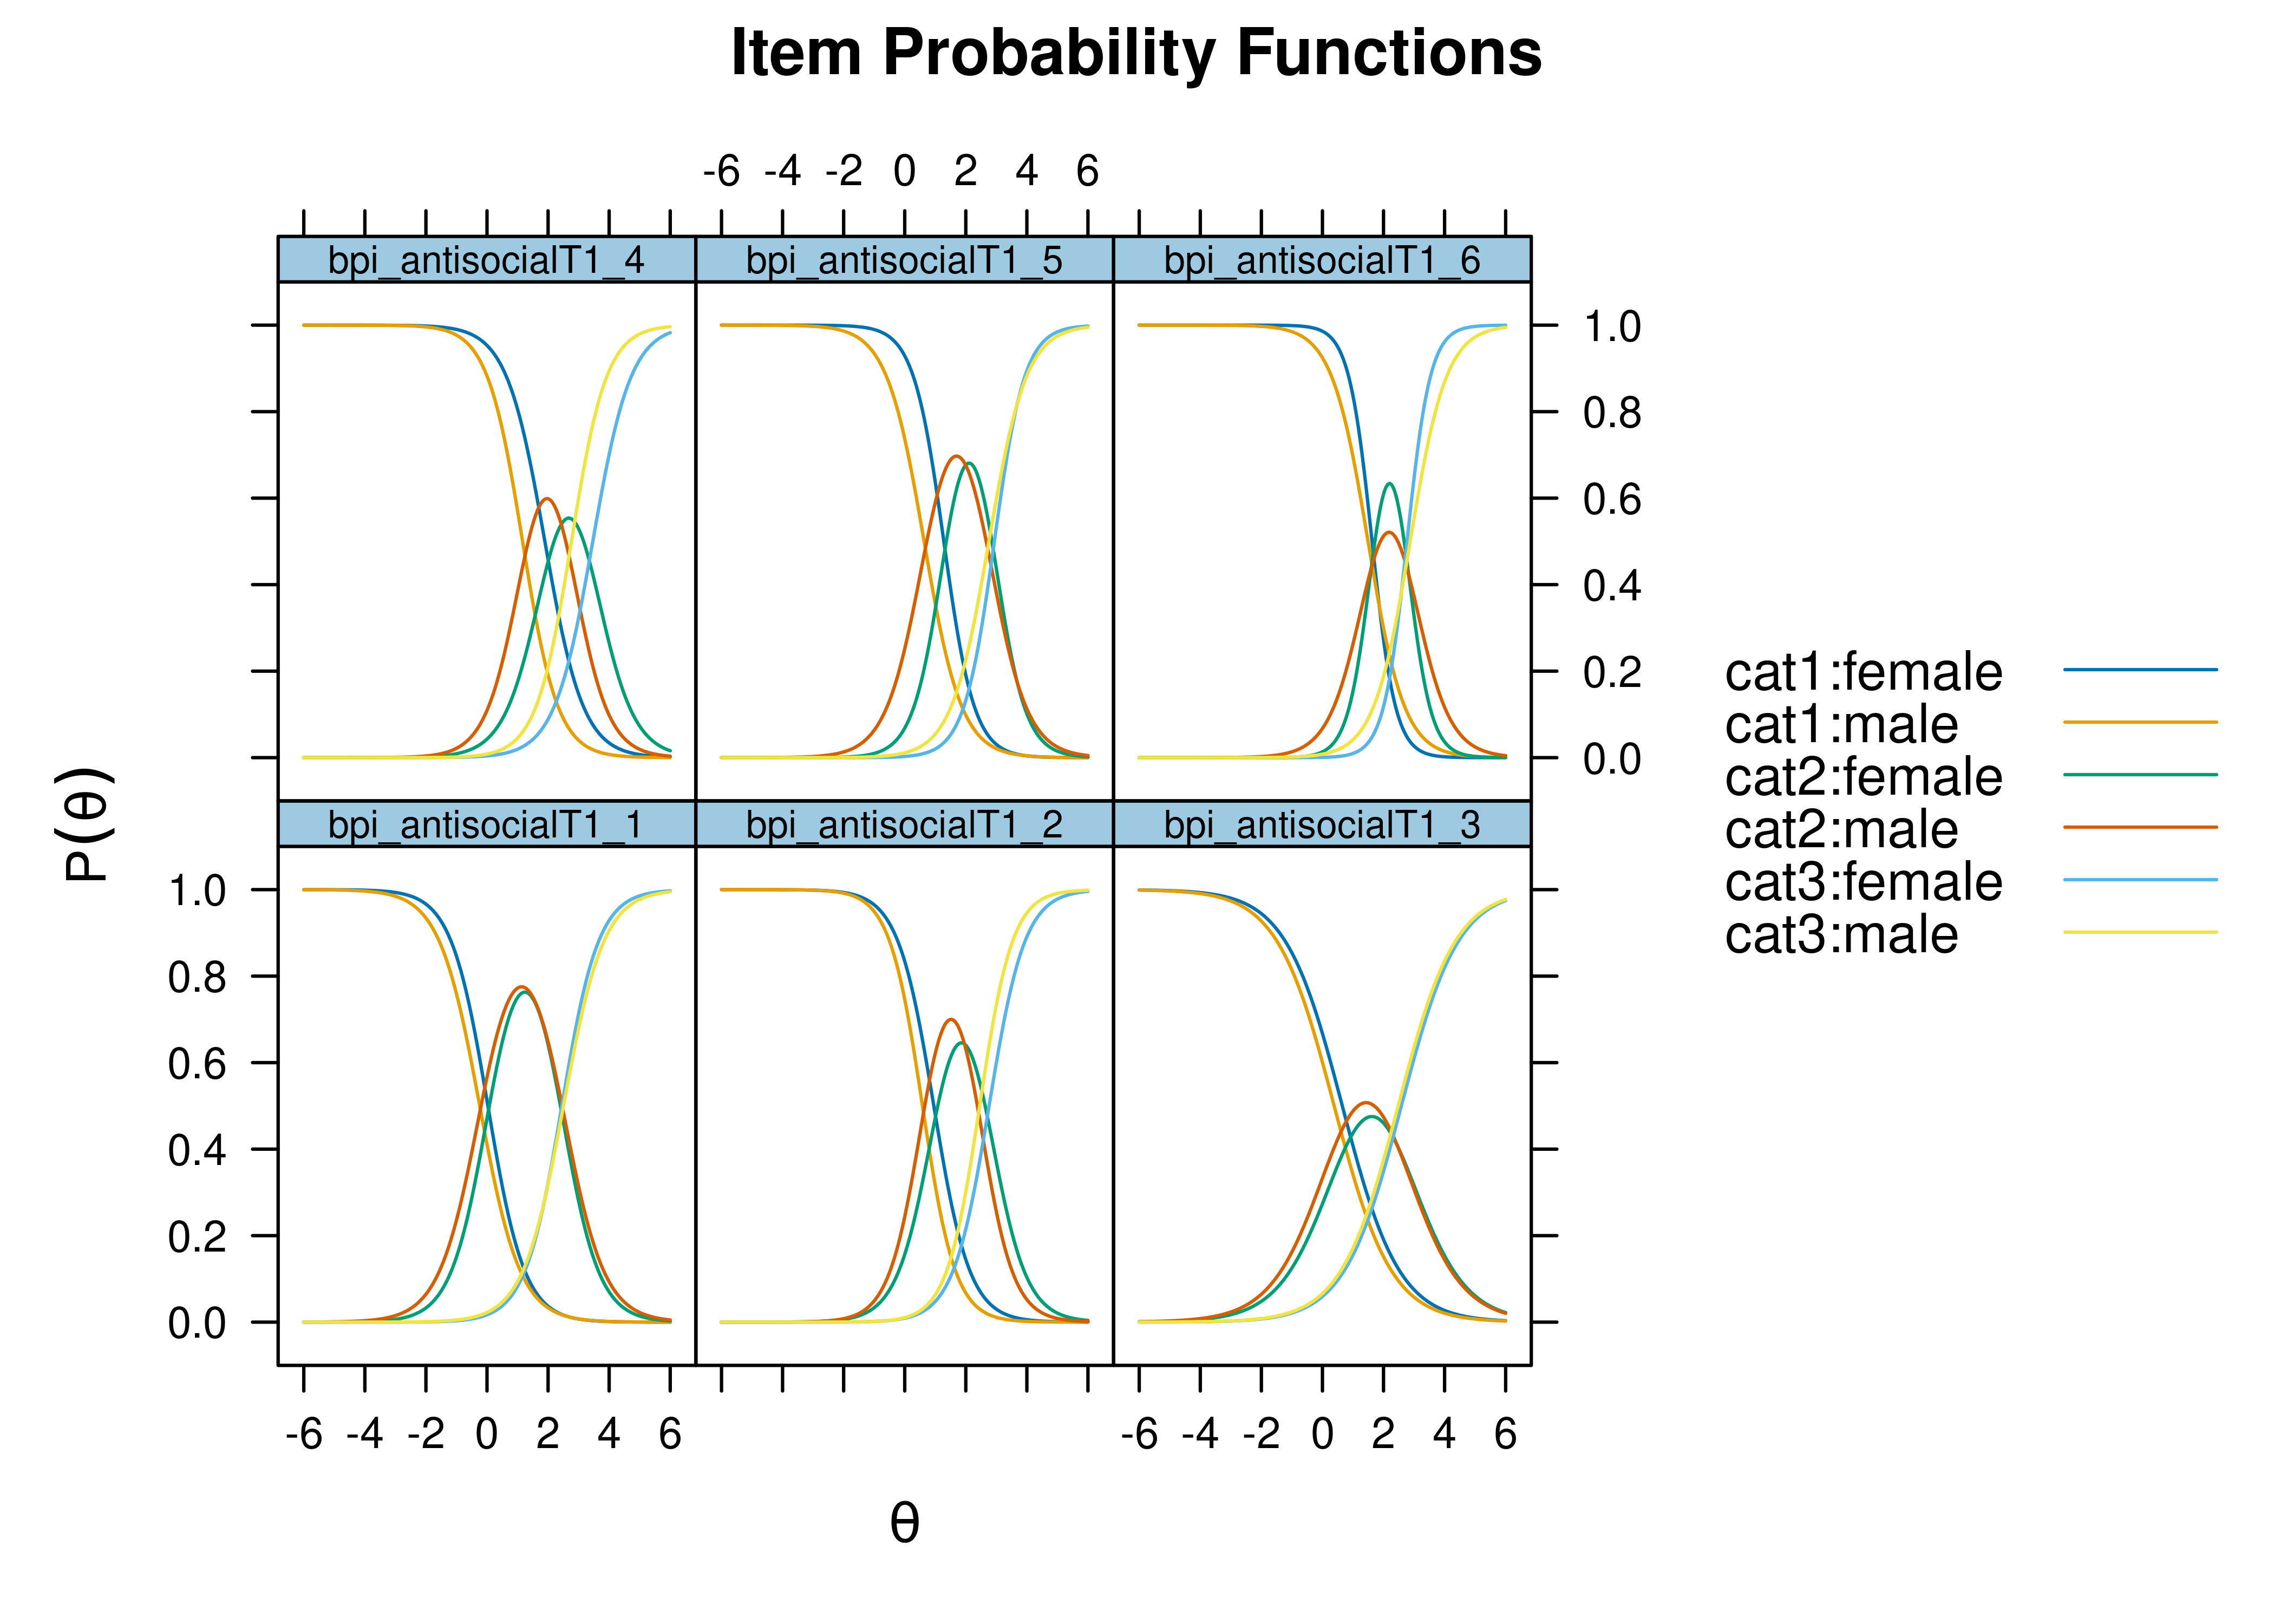 Item Probability Functions for Examining Differential Item Functioning in Terms of Severity.